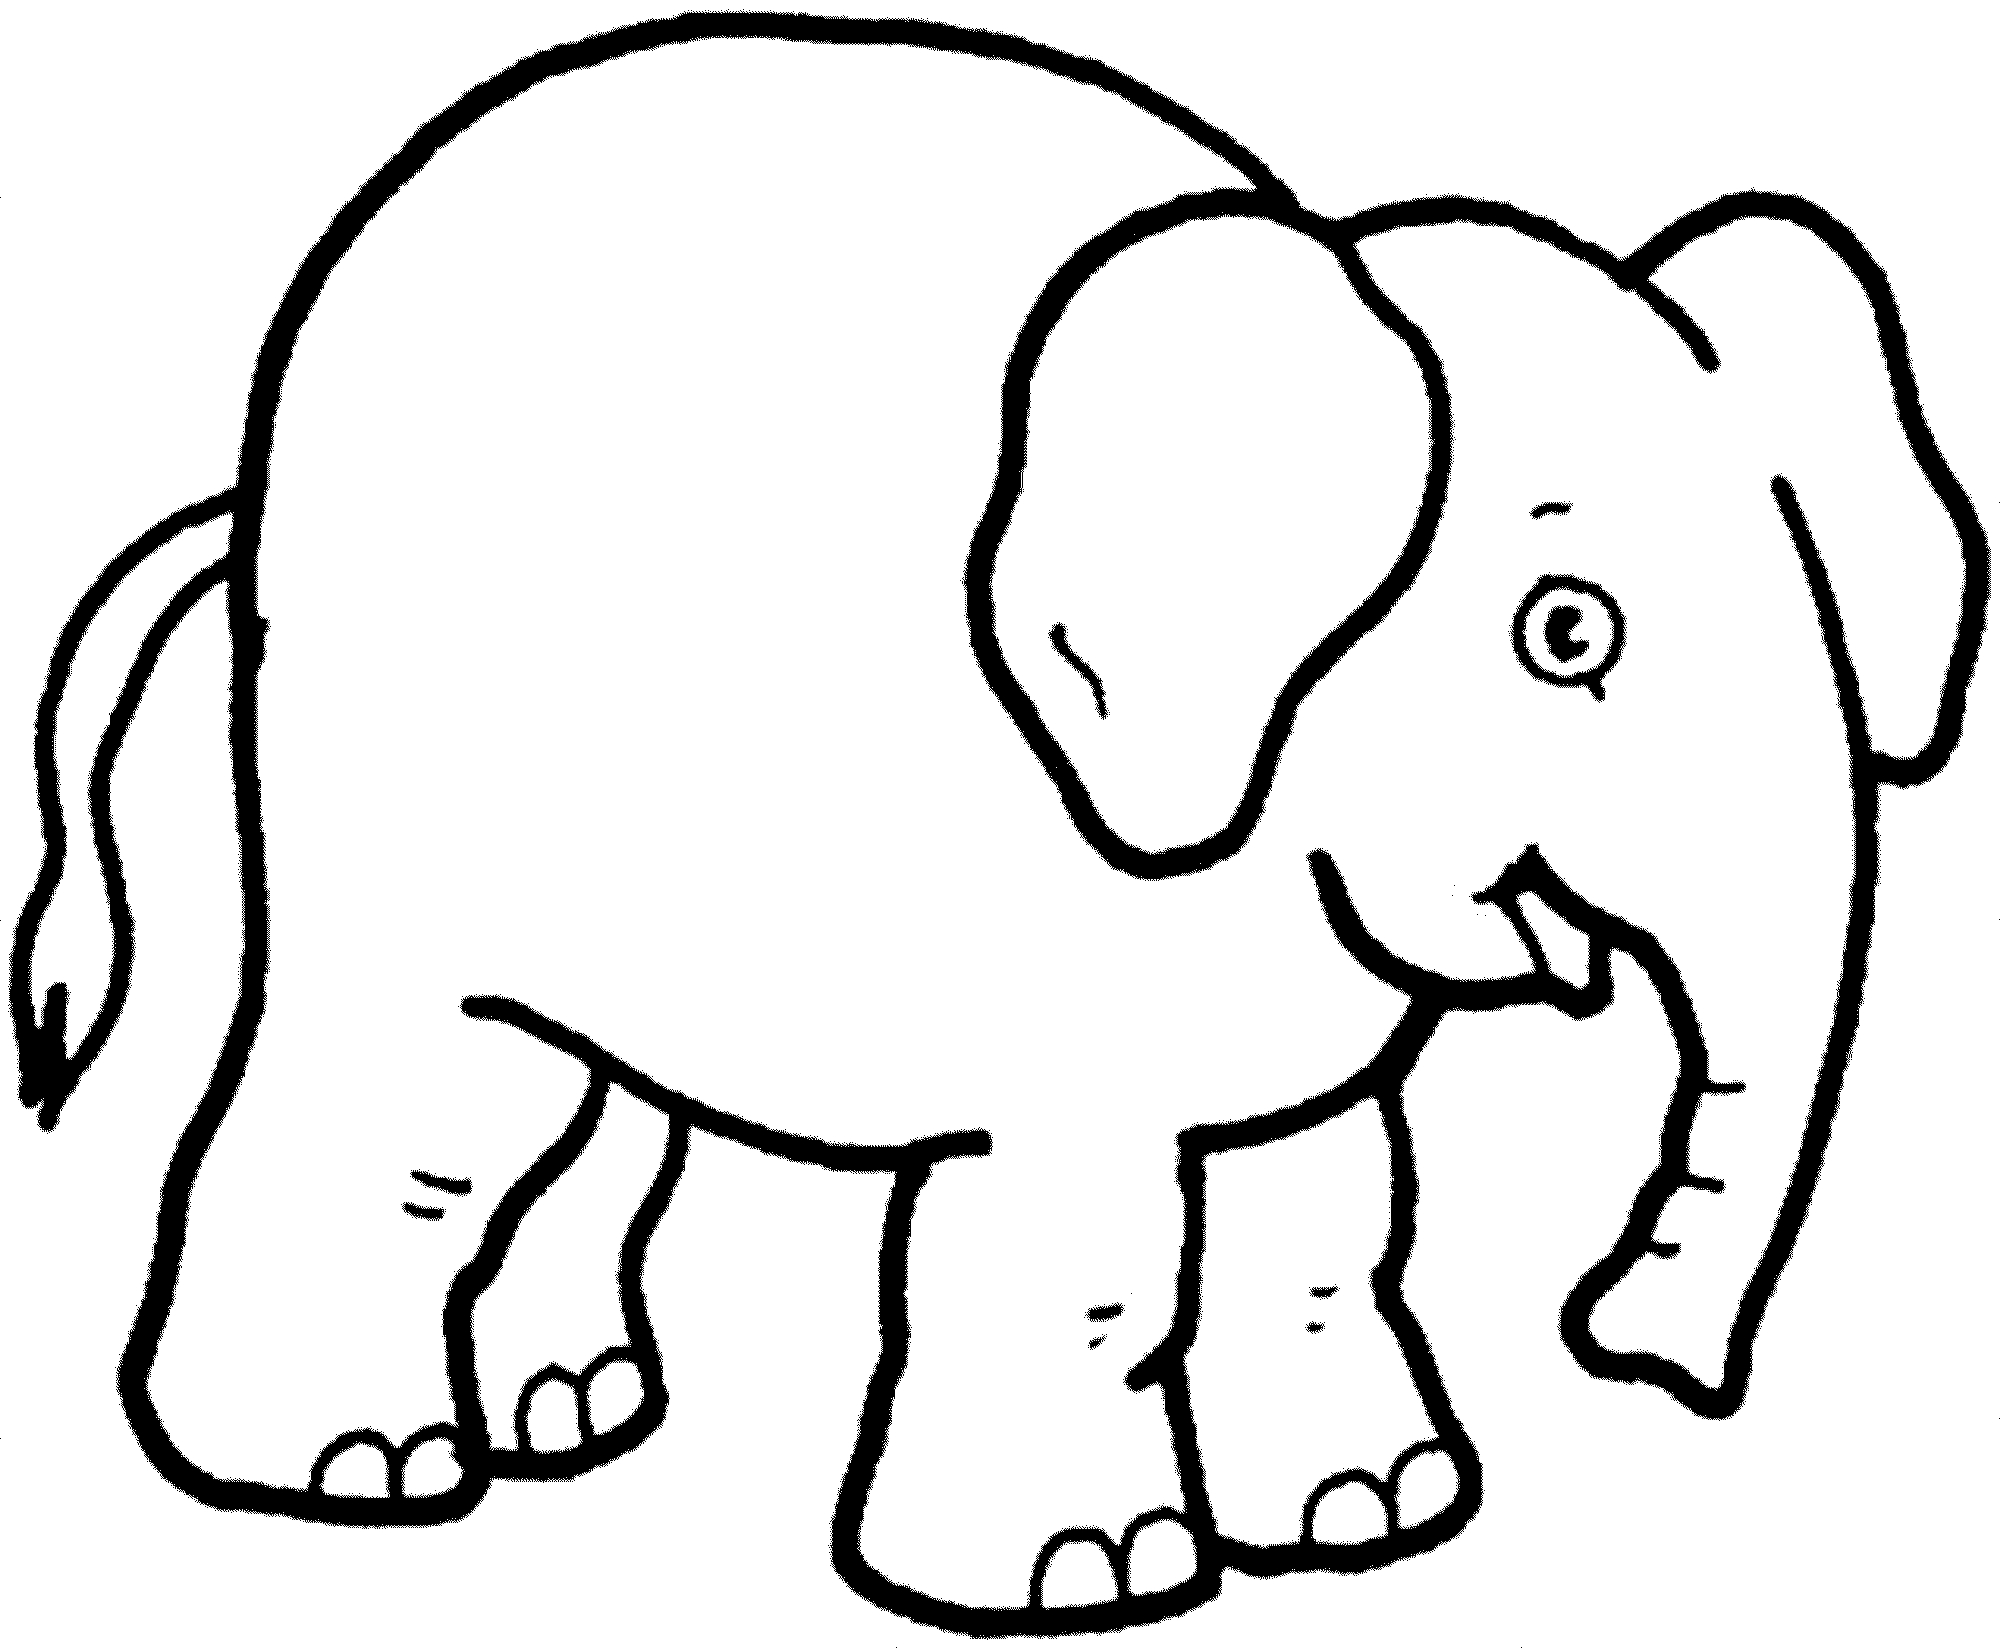 Elephant Coloring Pages For Preschool Teaching Kids Through Elephant Coloring Pages Best Apps For Kids